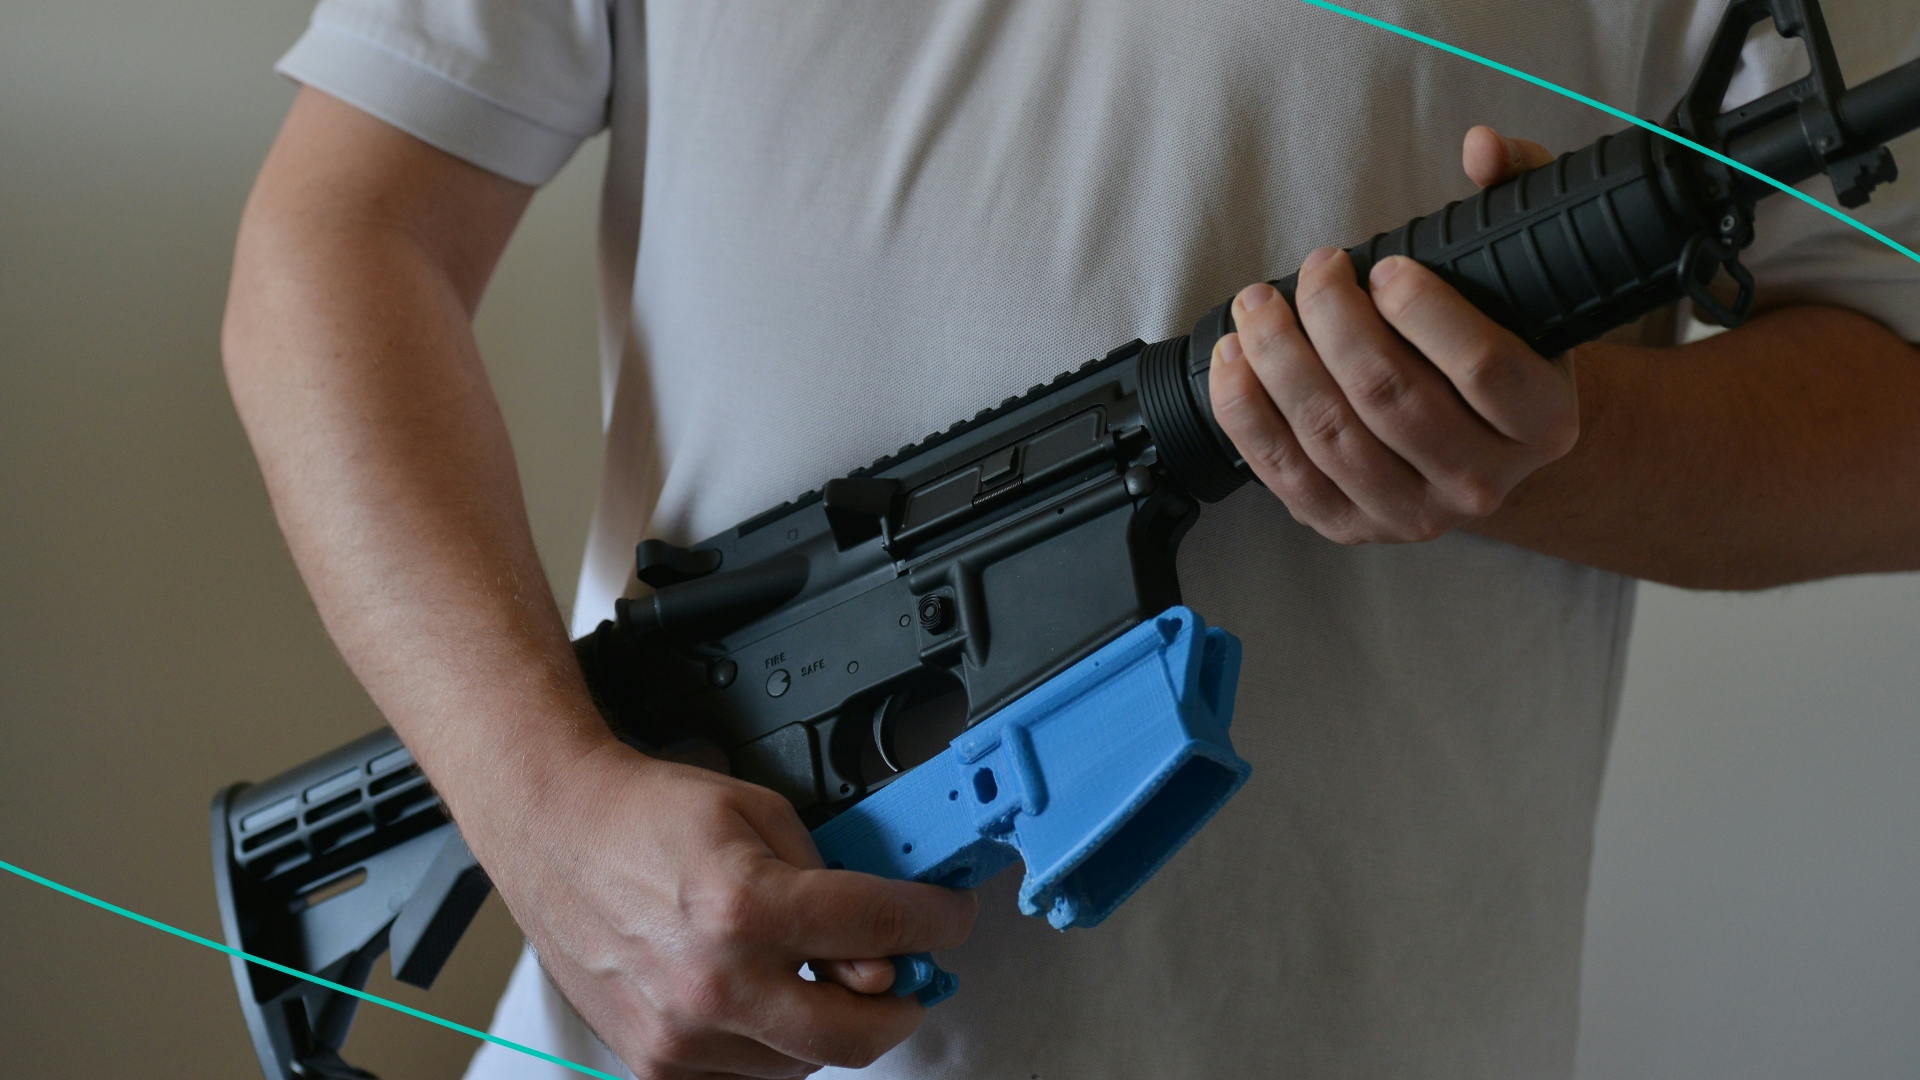 A man holds an AR-15 assault rifle along with a rifle's lower receiver made from a 3D printer